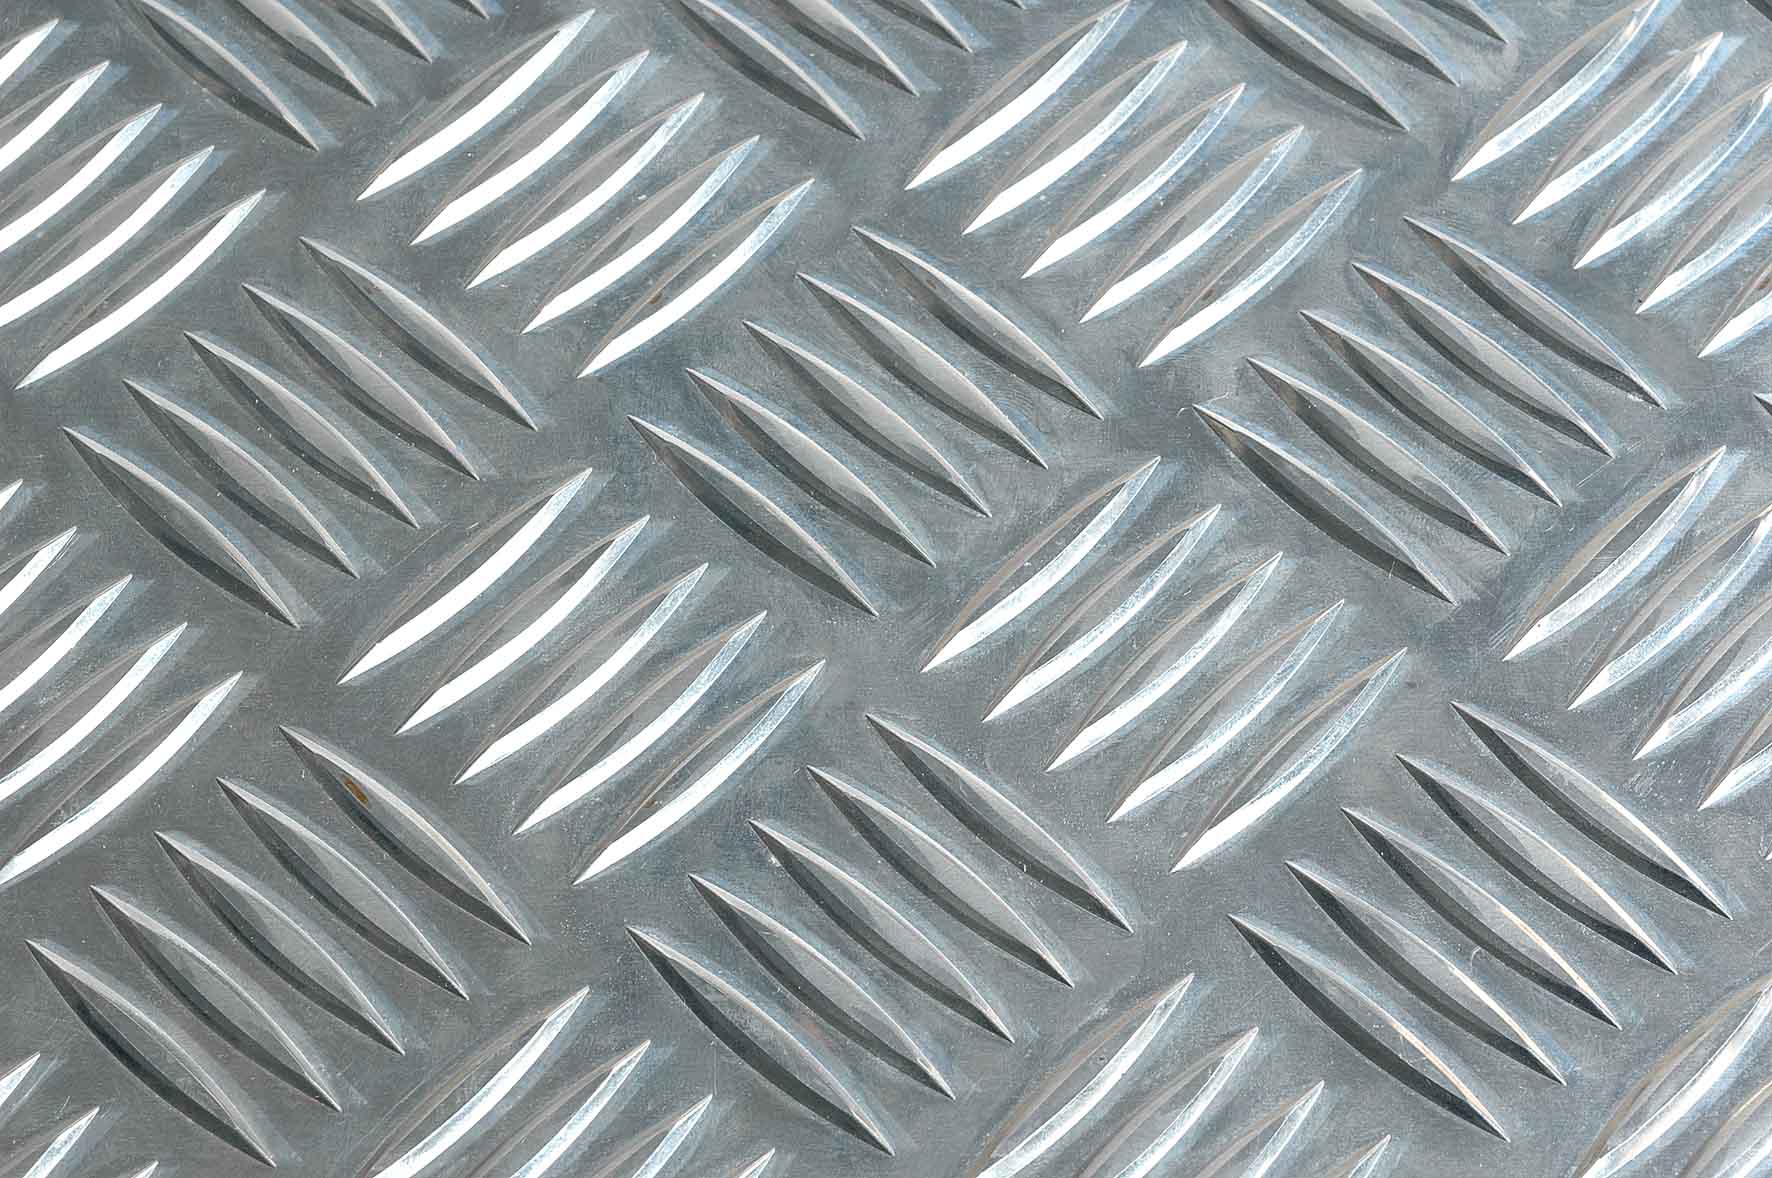 A piece of willow leaf pattern galvanized checker plate.